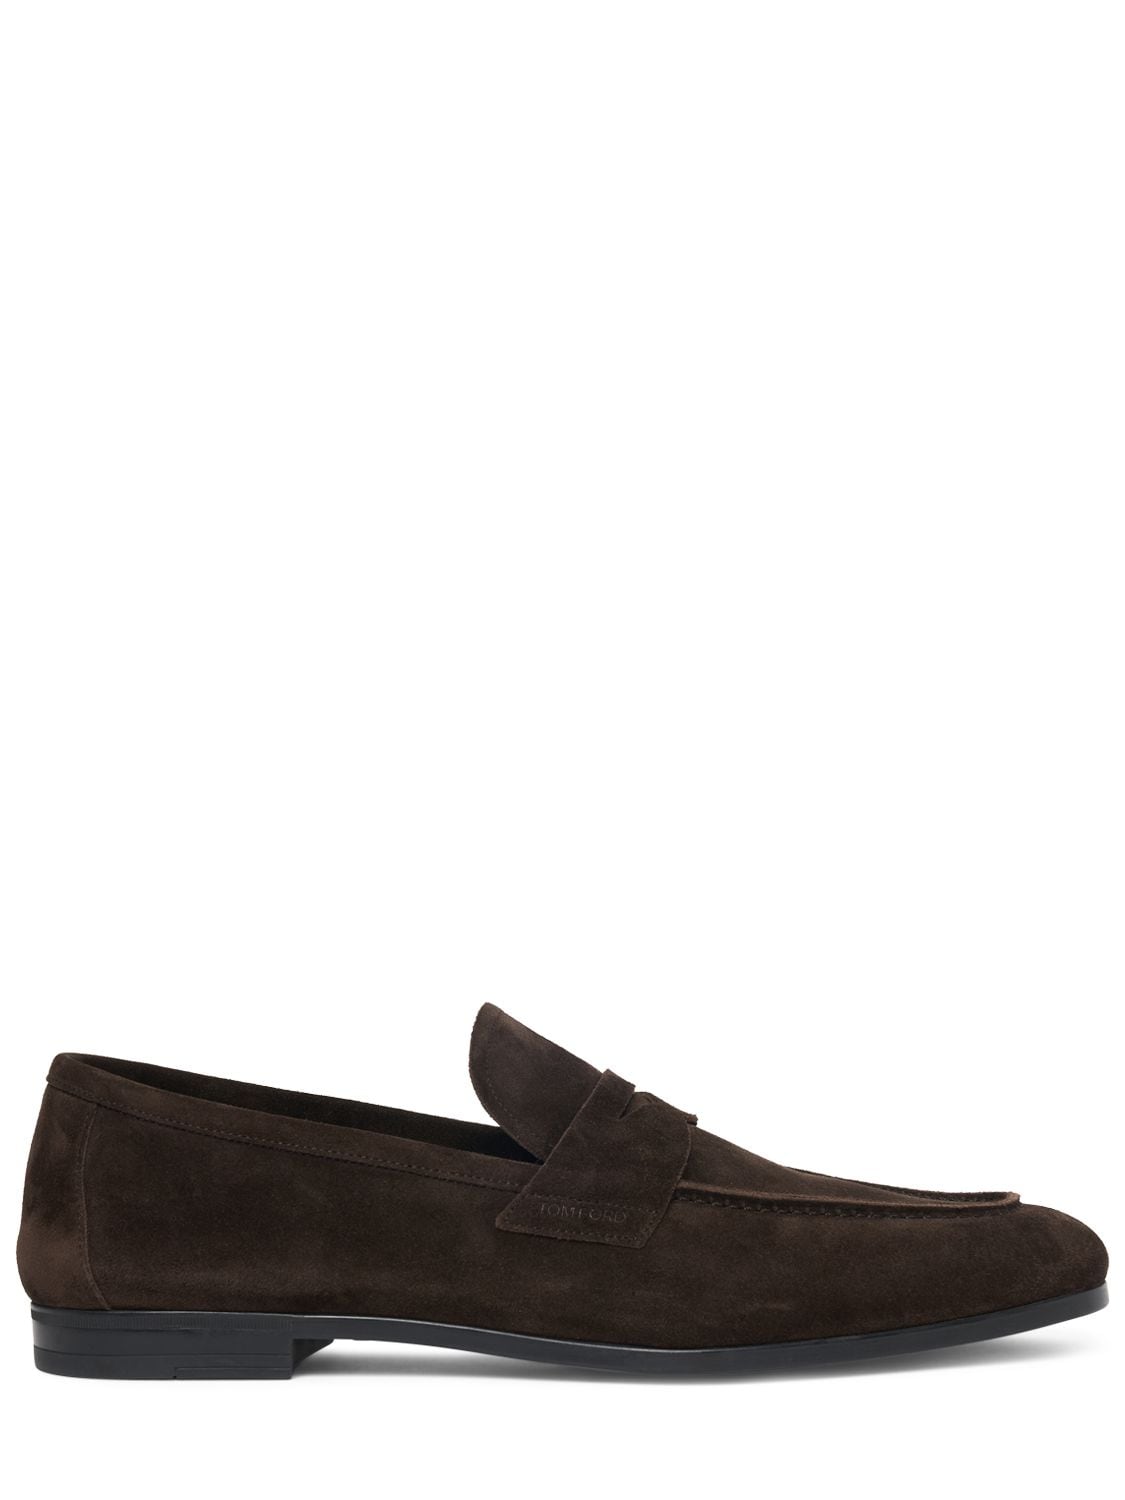 Tom Ford Sean Penny Loafers In Brown